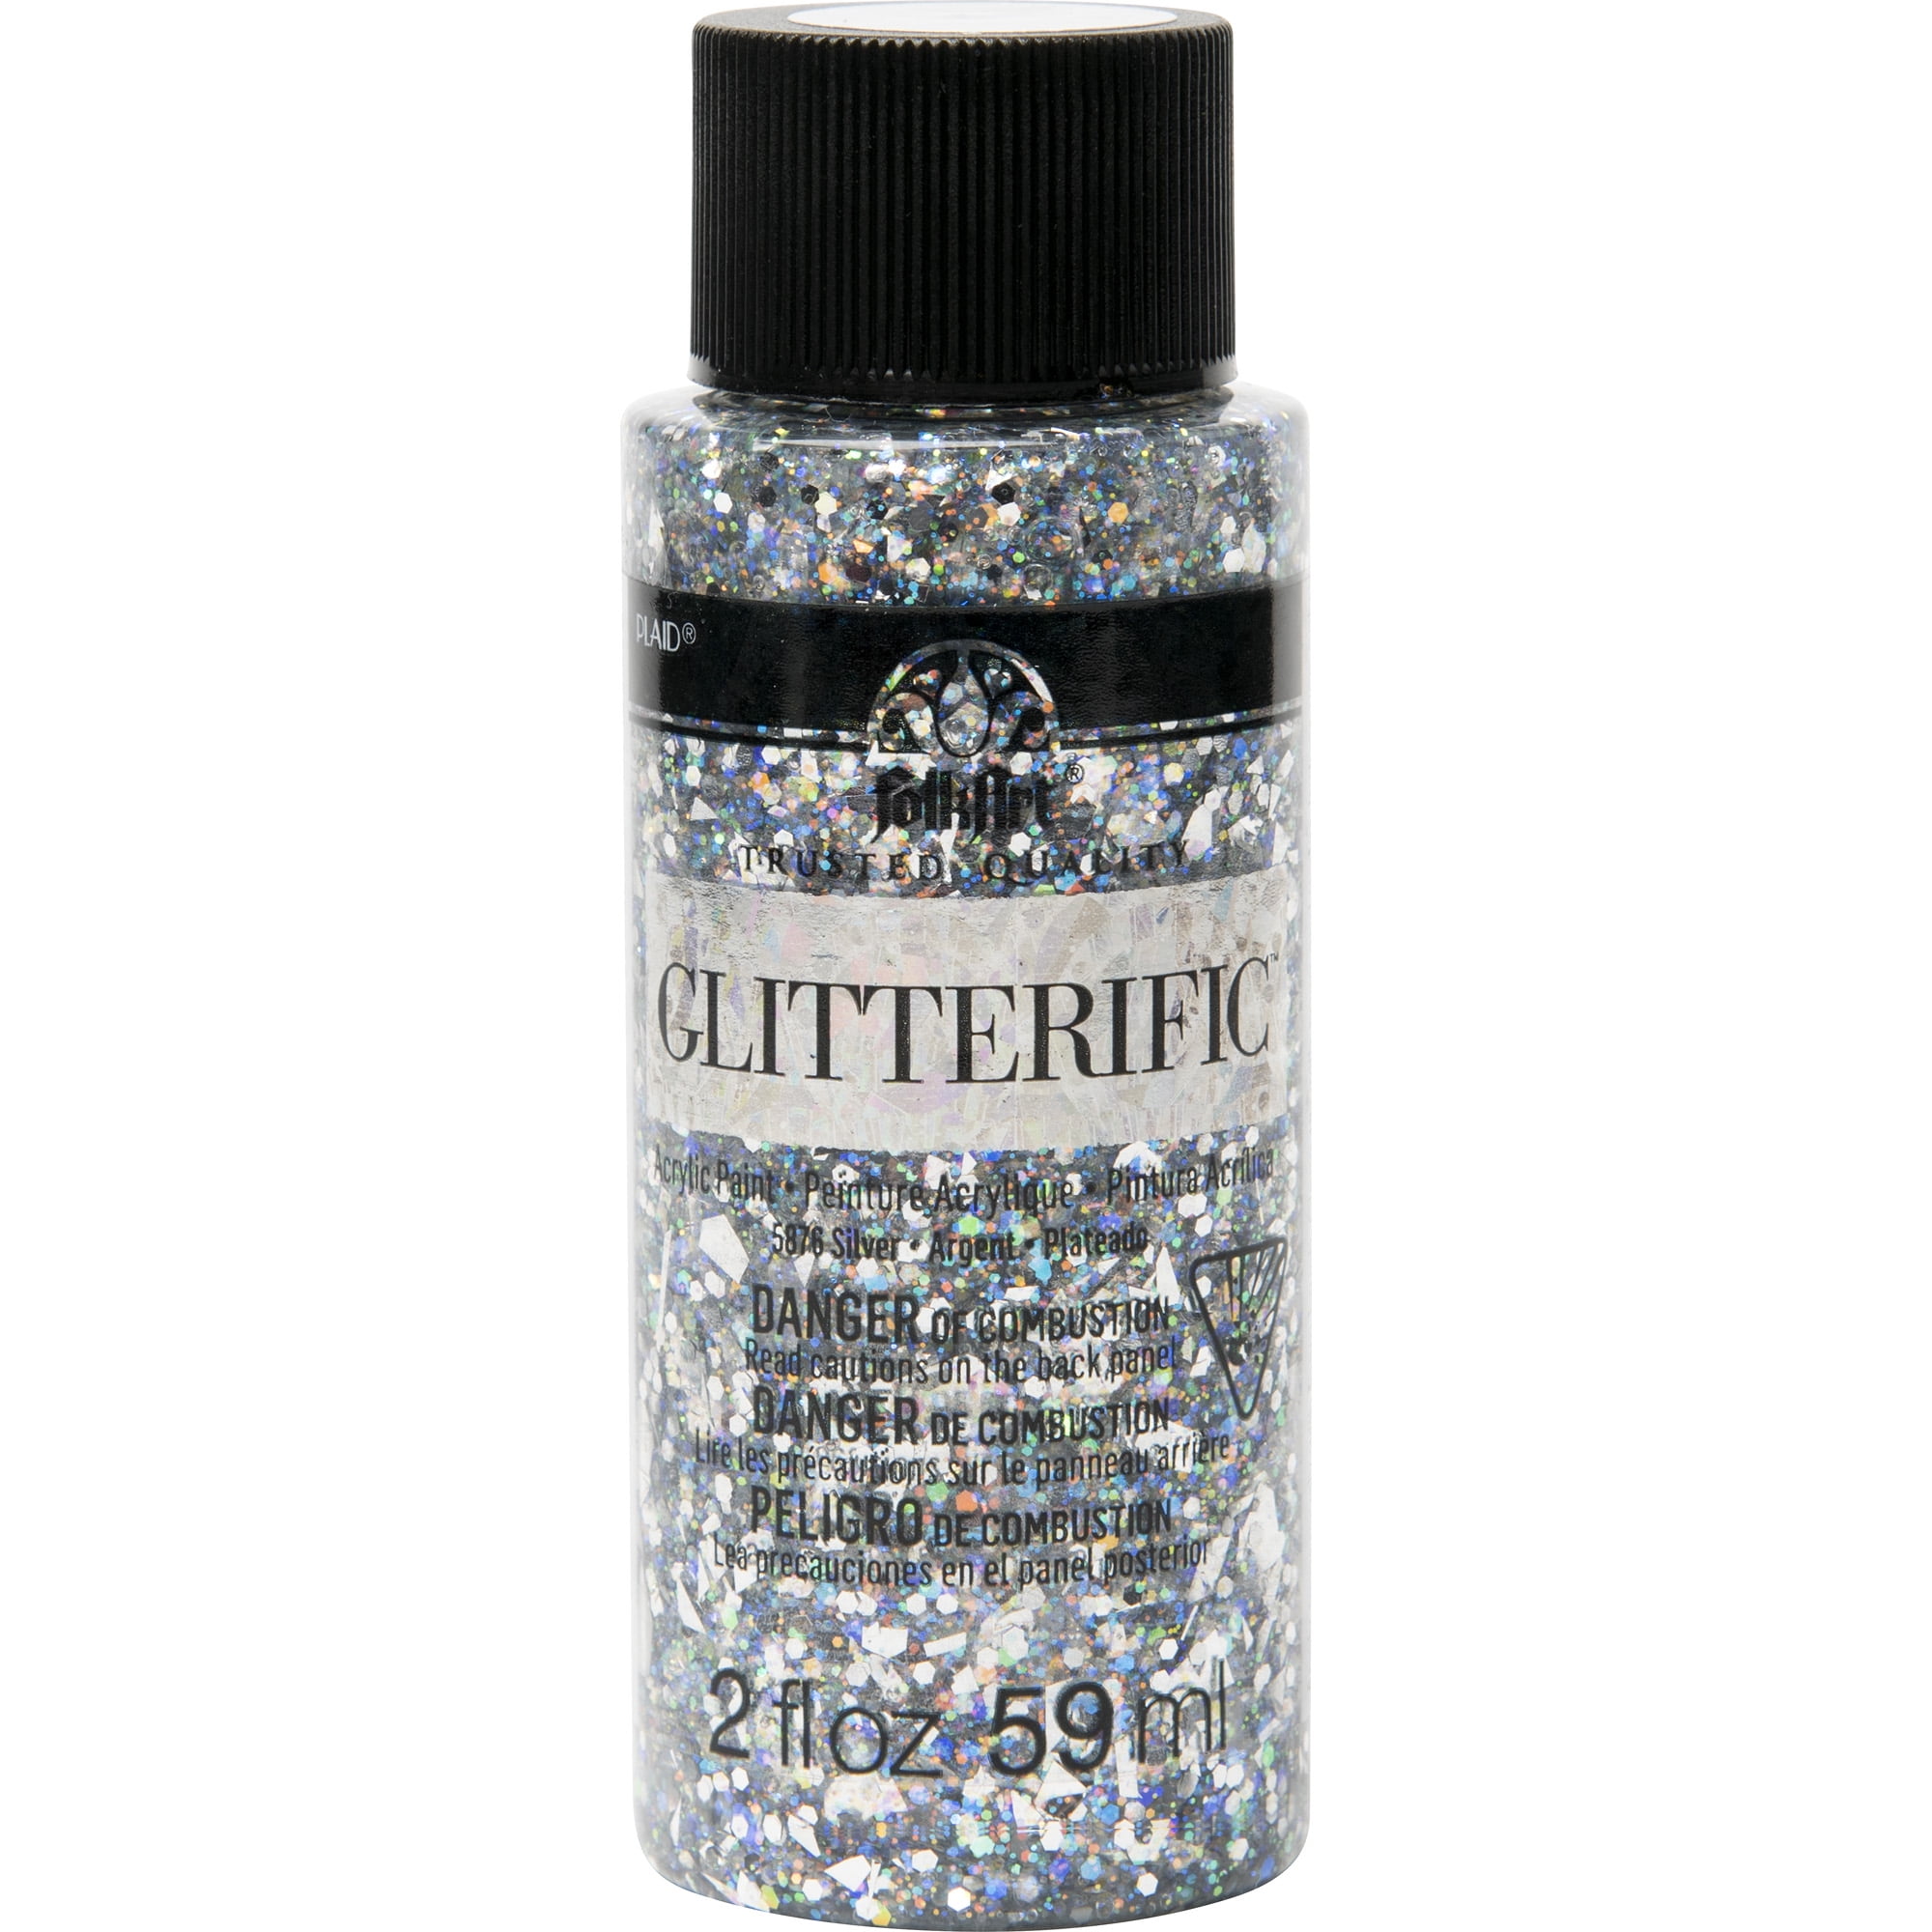 FolkArt Glitterific Pop Acrylic Craft Paint, Silver Lining 2 fl oz Premium  Glitter Finish Paint, Perfect For Easy To Apply DIY Arts And Crafts, 12003